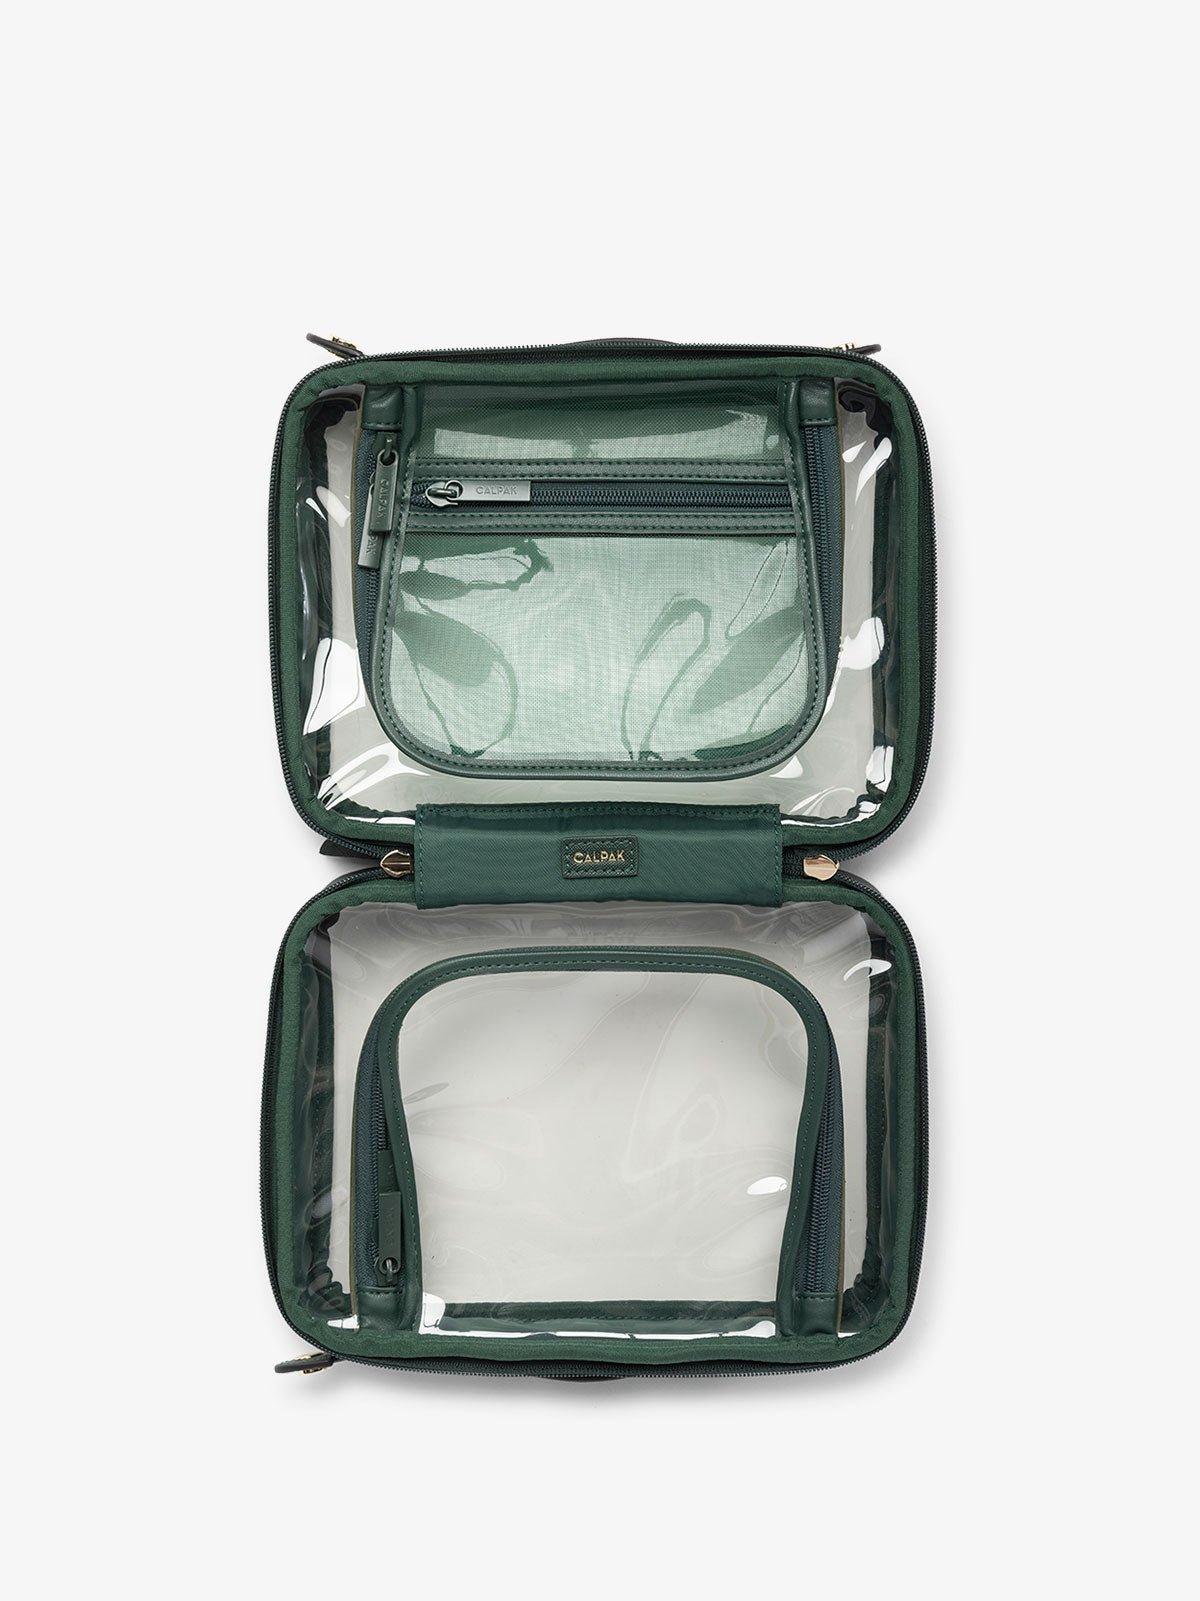 CALPAK clear travel makeup bag with compartments in emerald green